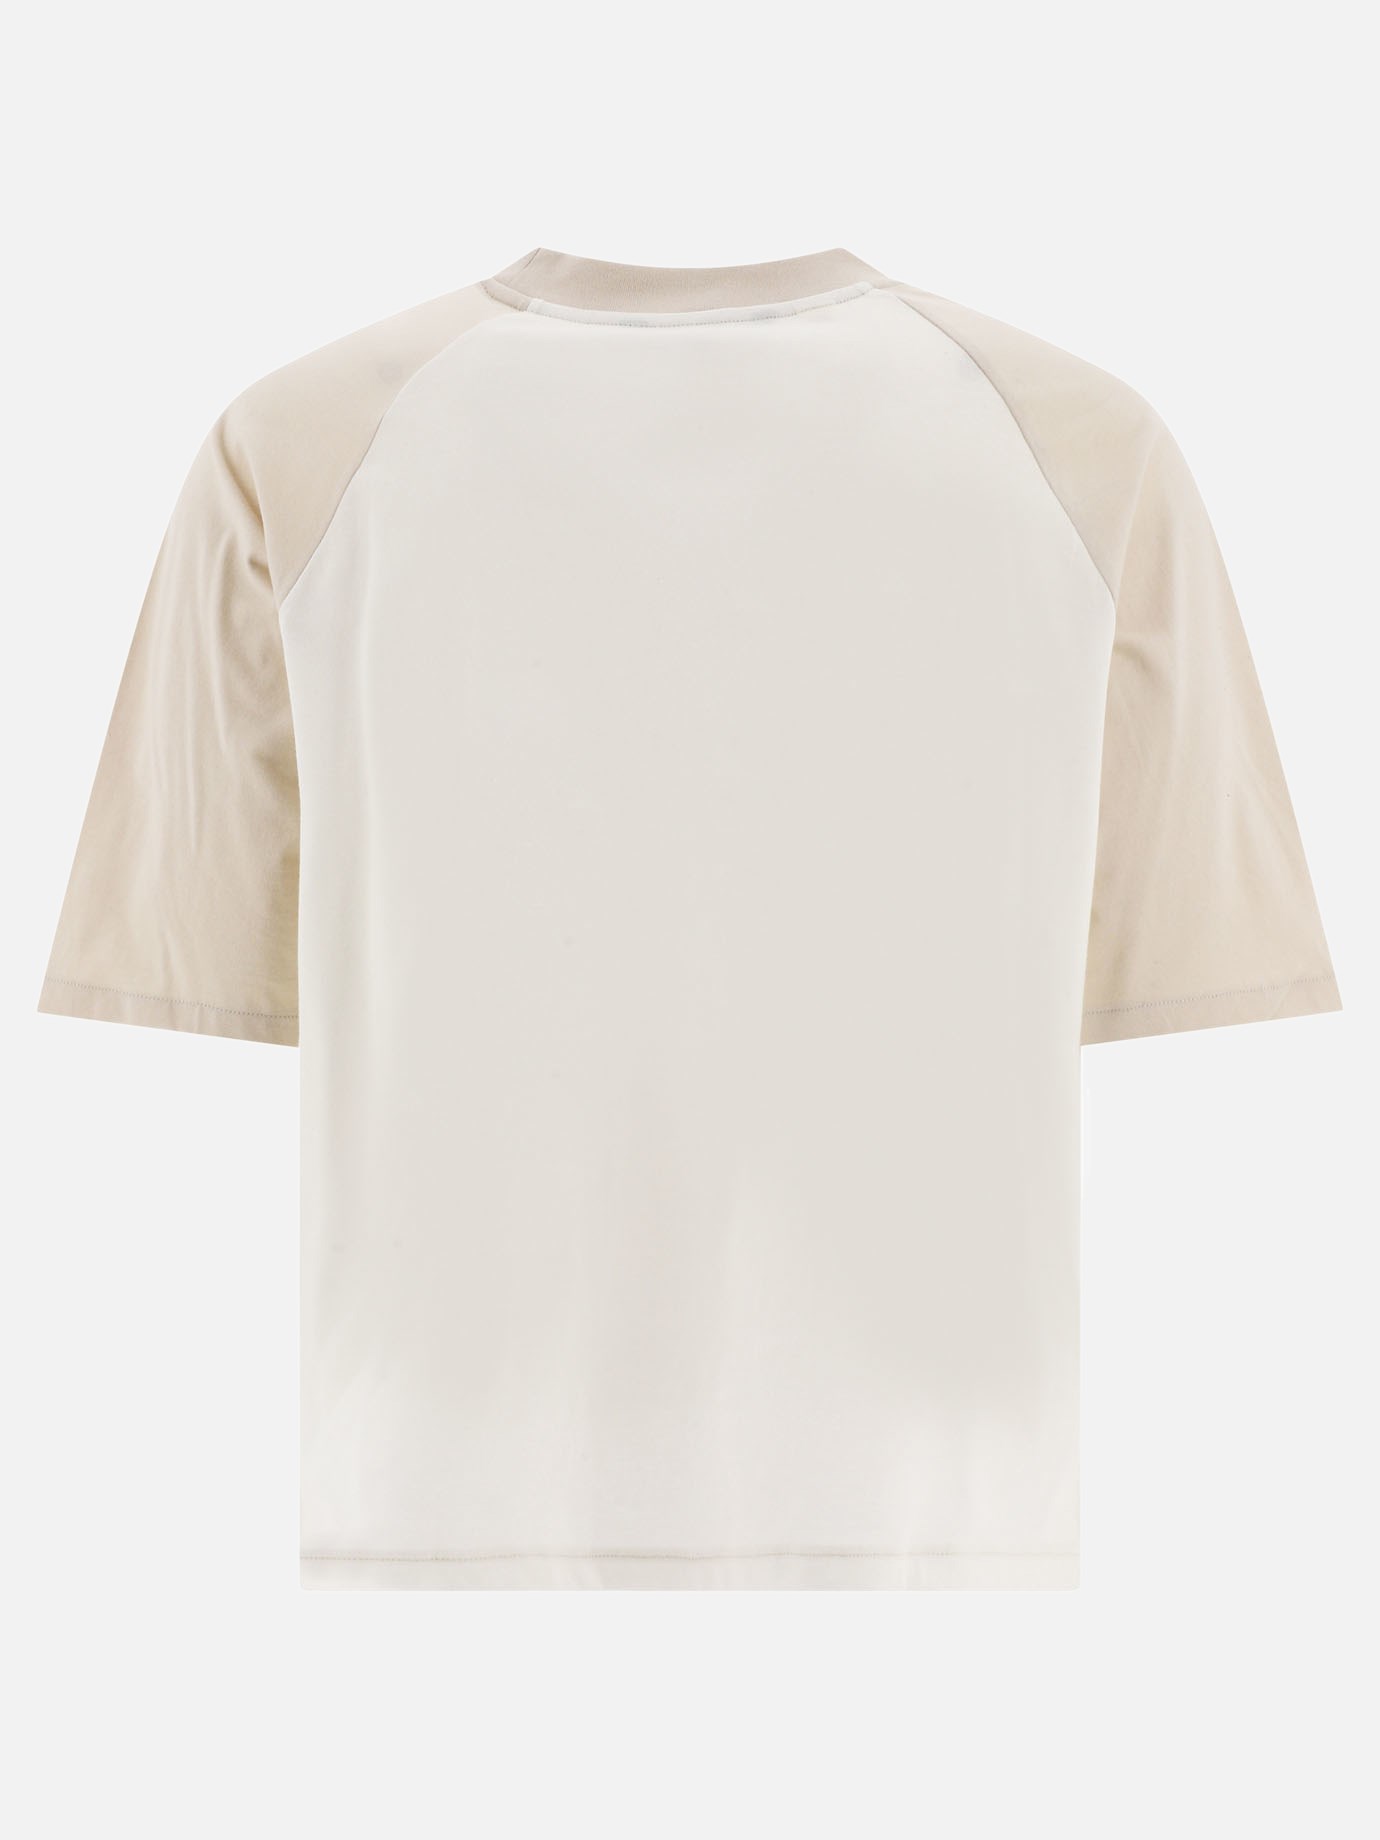  Raglan  t-shirt by Levi's Made & Crafted